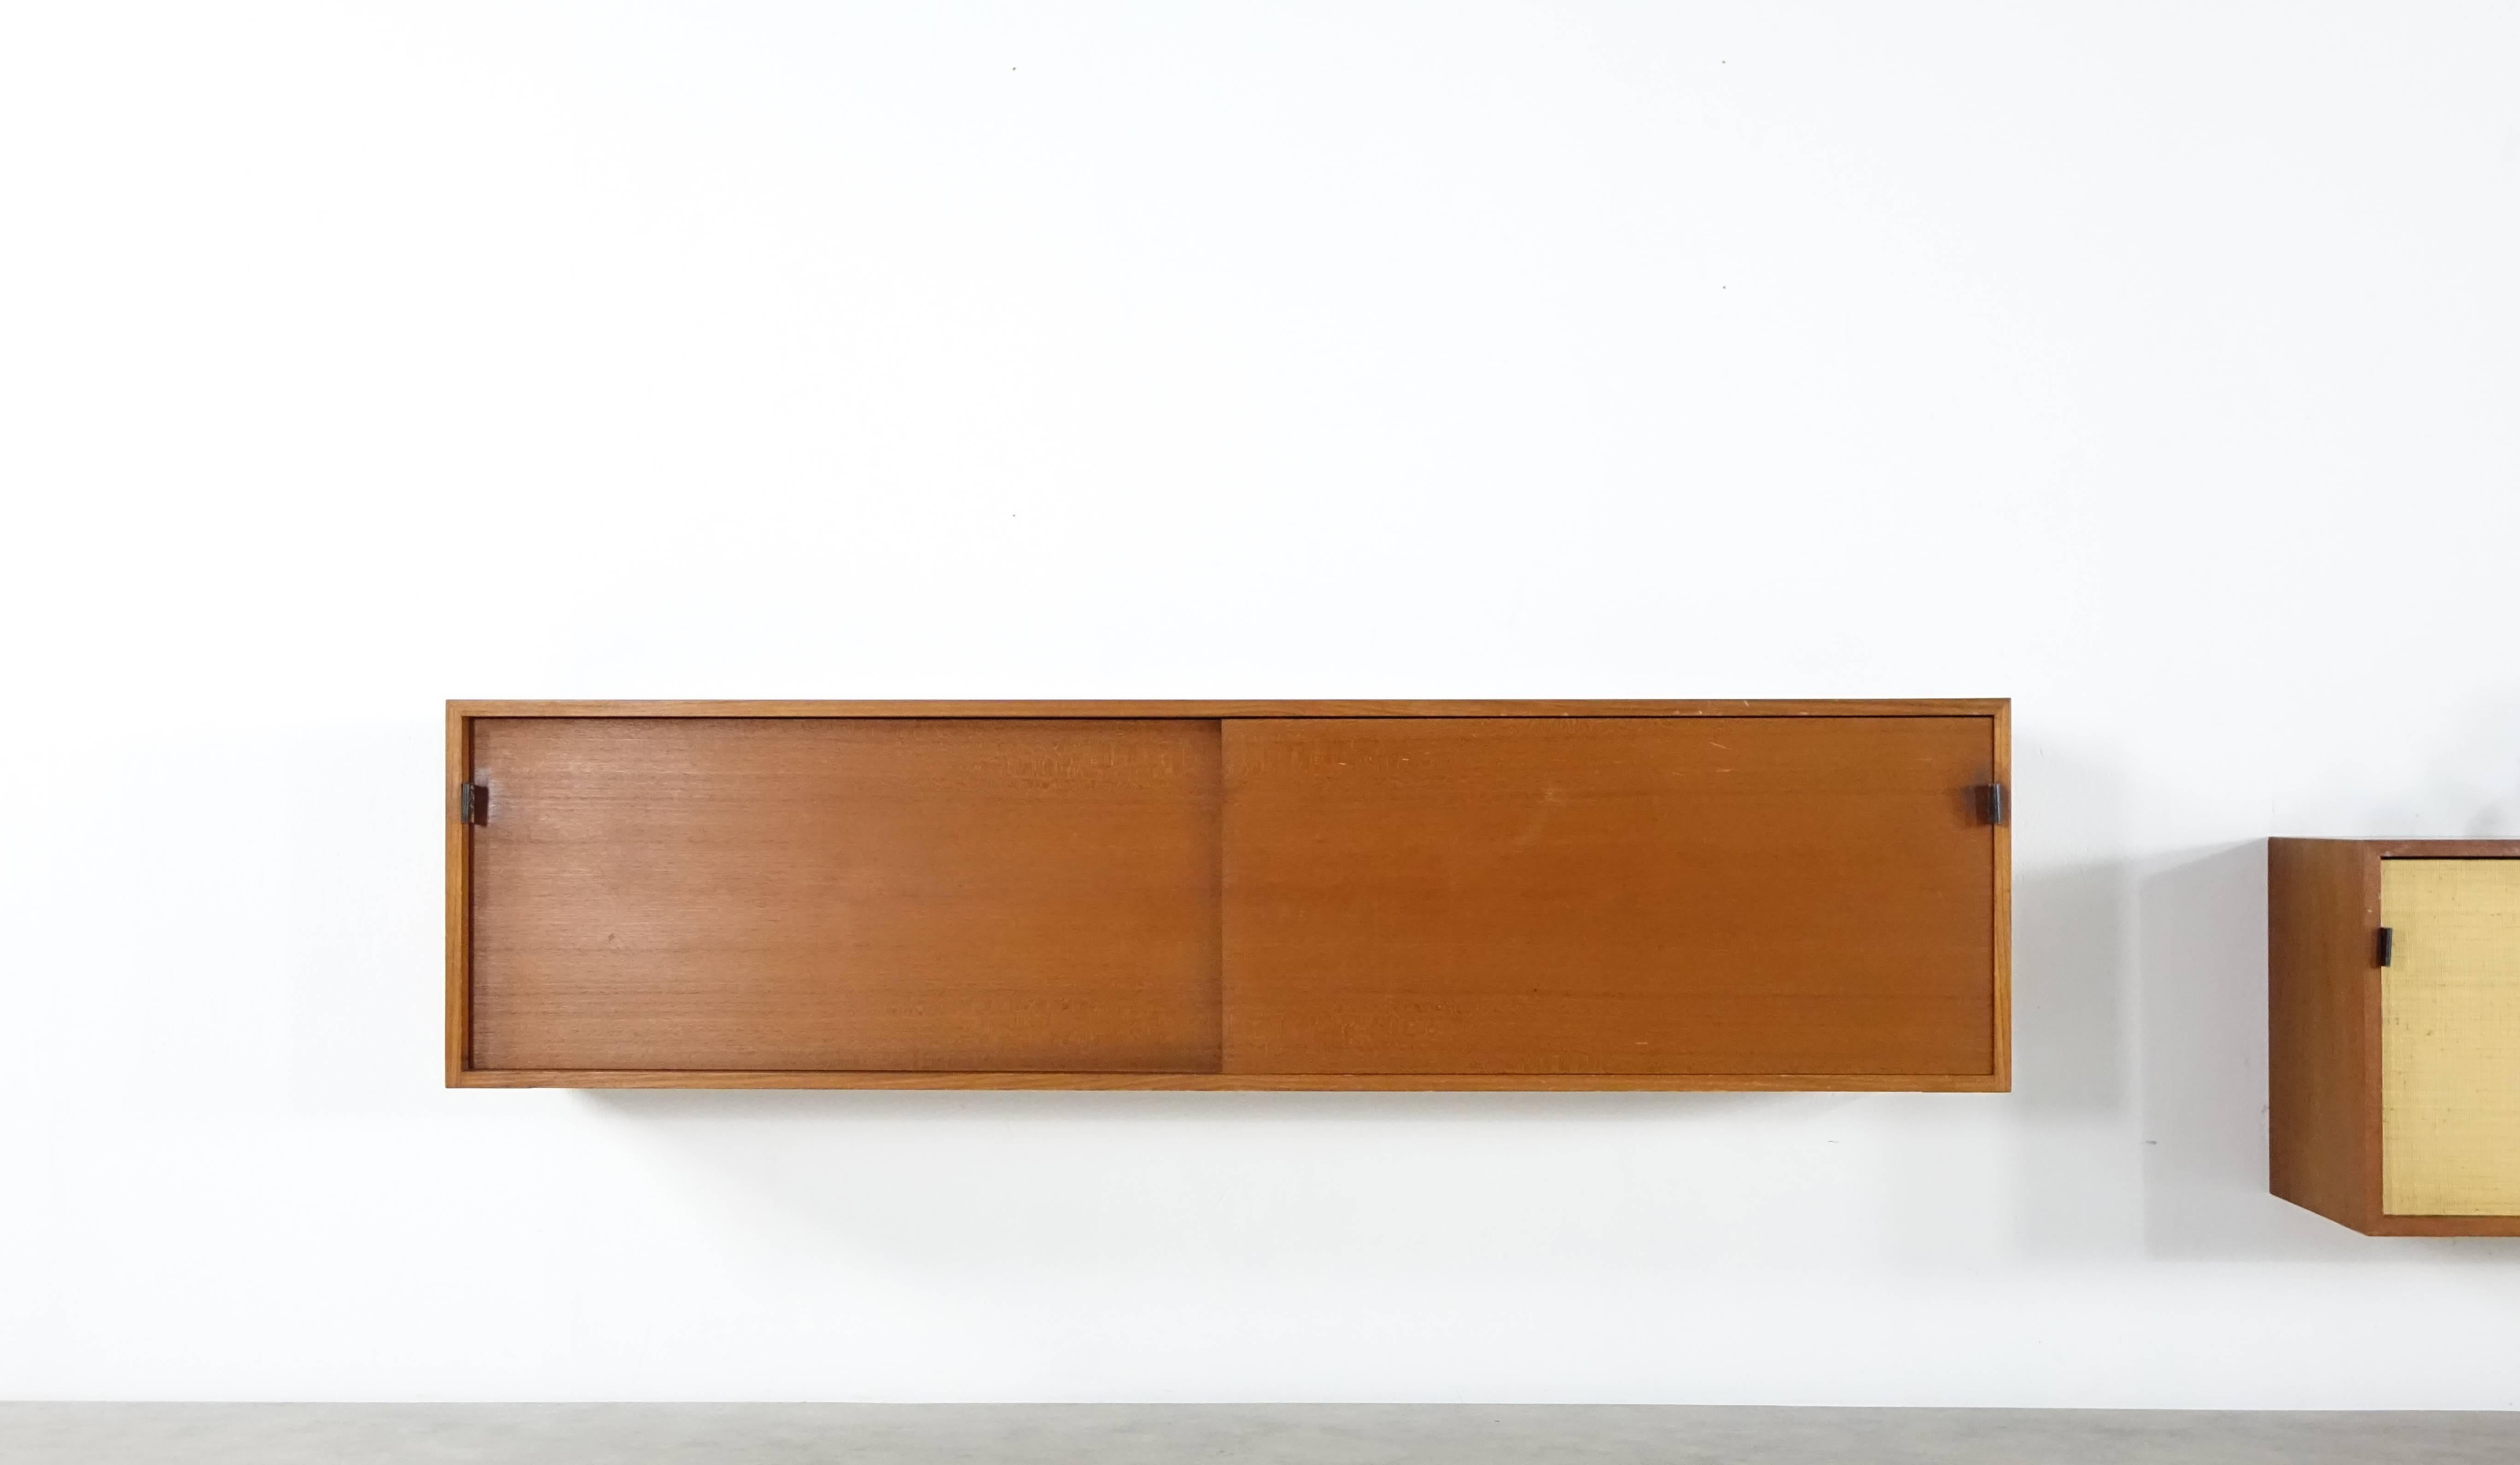 Sideboard mod°123.
By Florence Knoll for Knoll International in 1952.

Sideboard comes in teak, sliding doors mit leather grips. Original labels on the backside. Wall-mounted.

Very nice interior with drawers. Excellent condition!

Dimensions